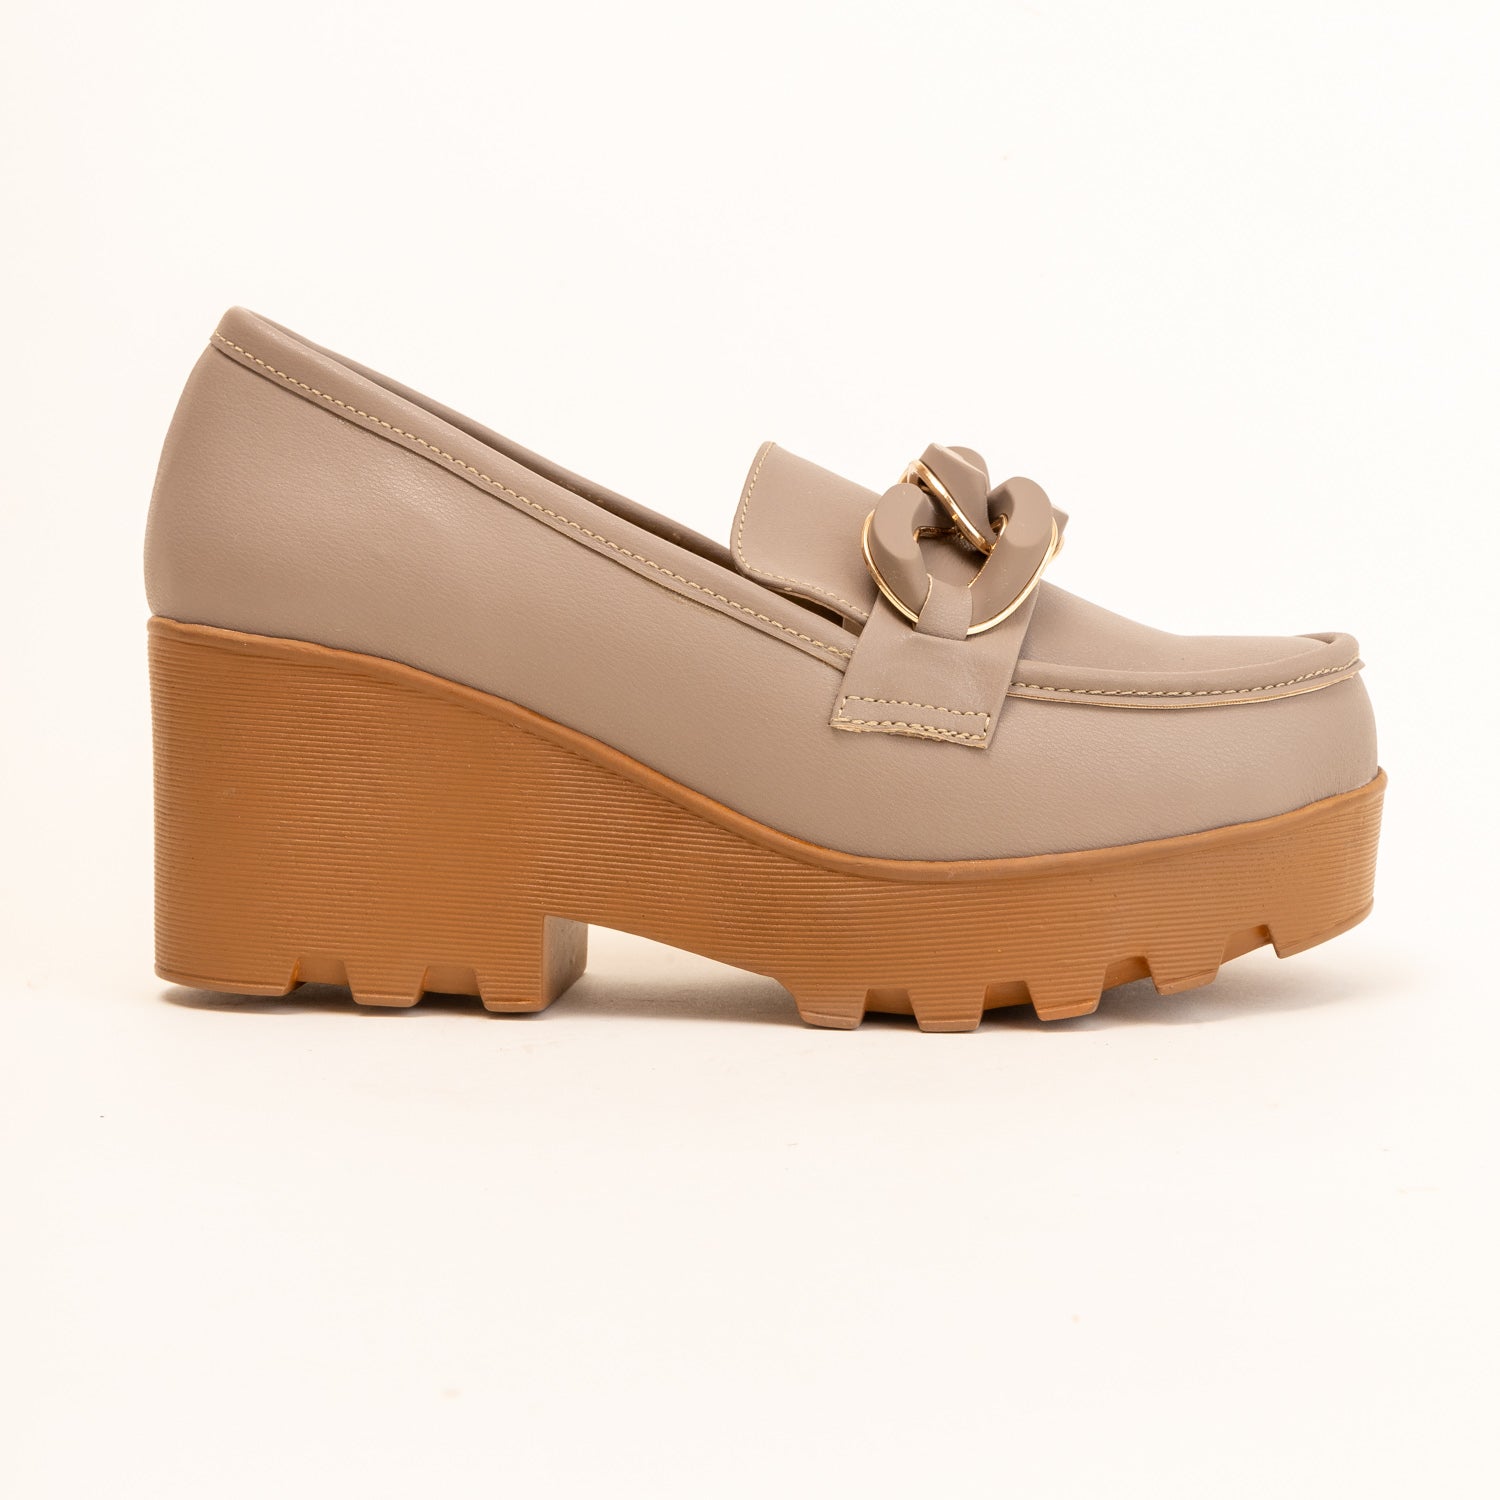 COCO MELT-Chunky shoe in Chiku colour.